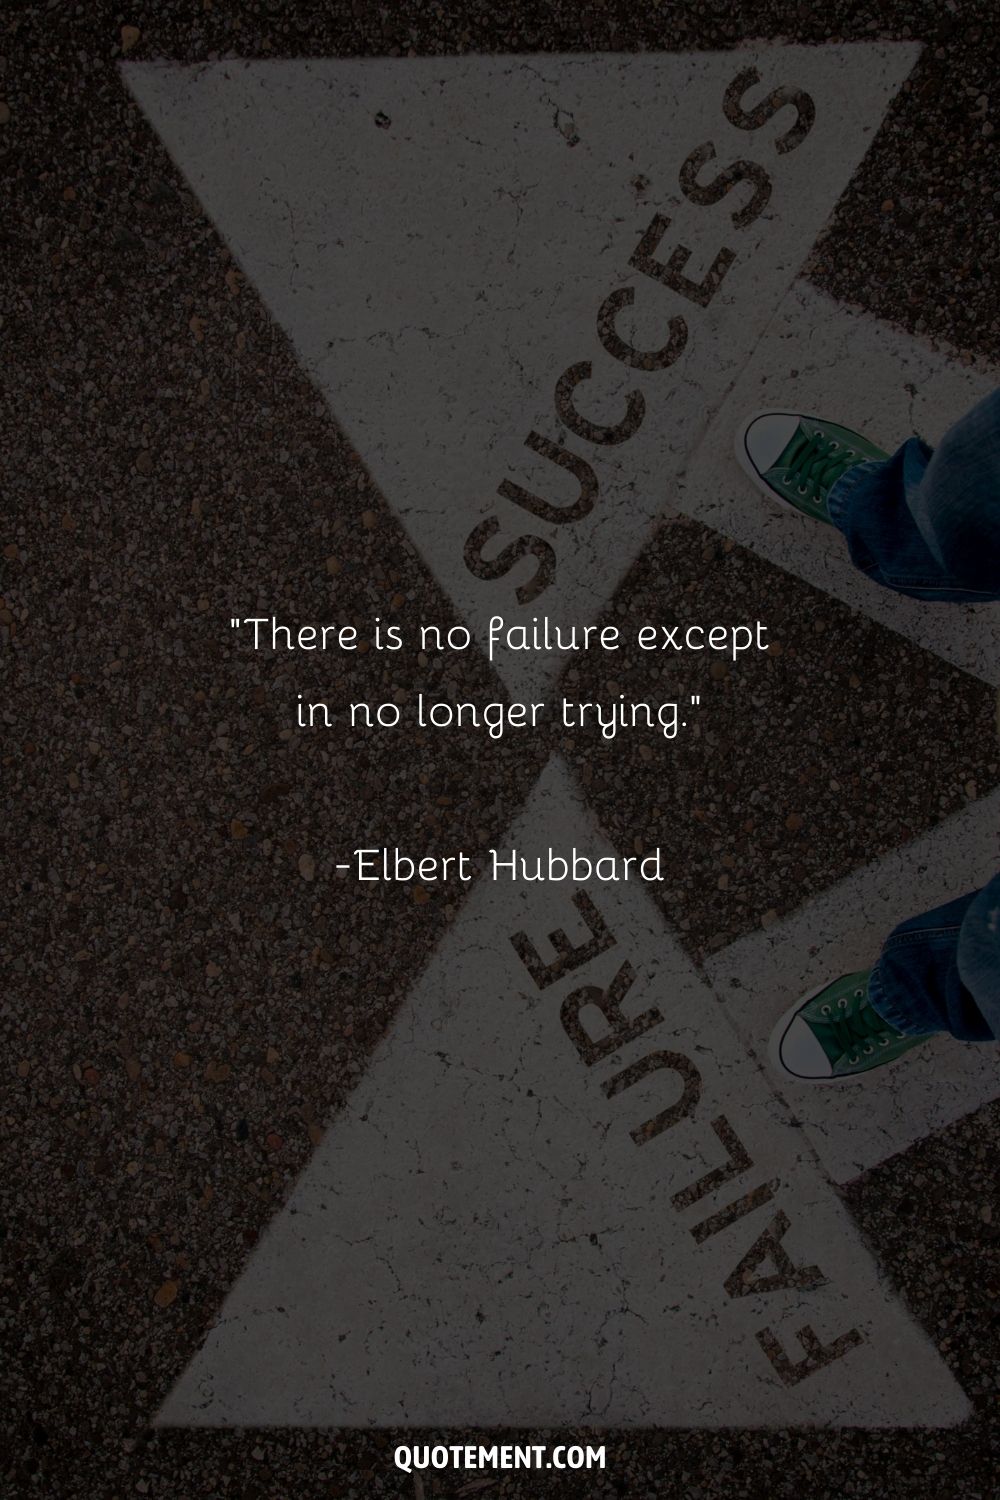 “There is no failure except in no longer trying.” ― Elbert Hubbard